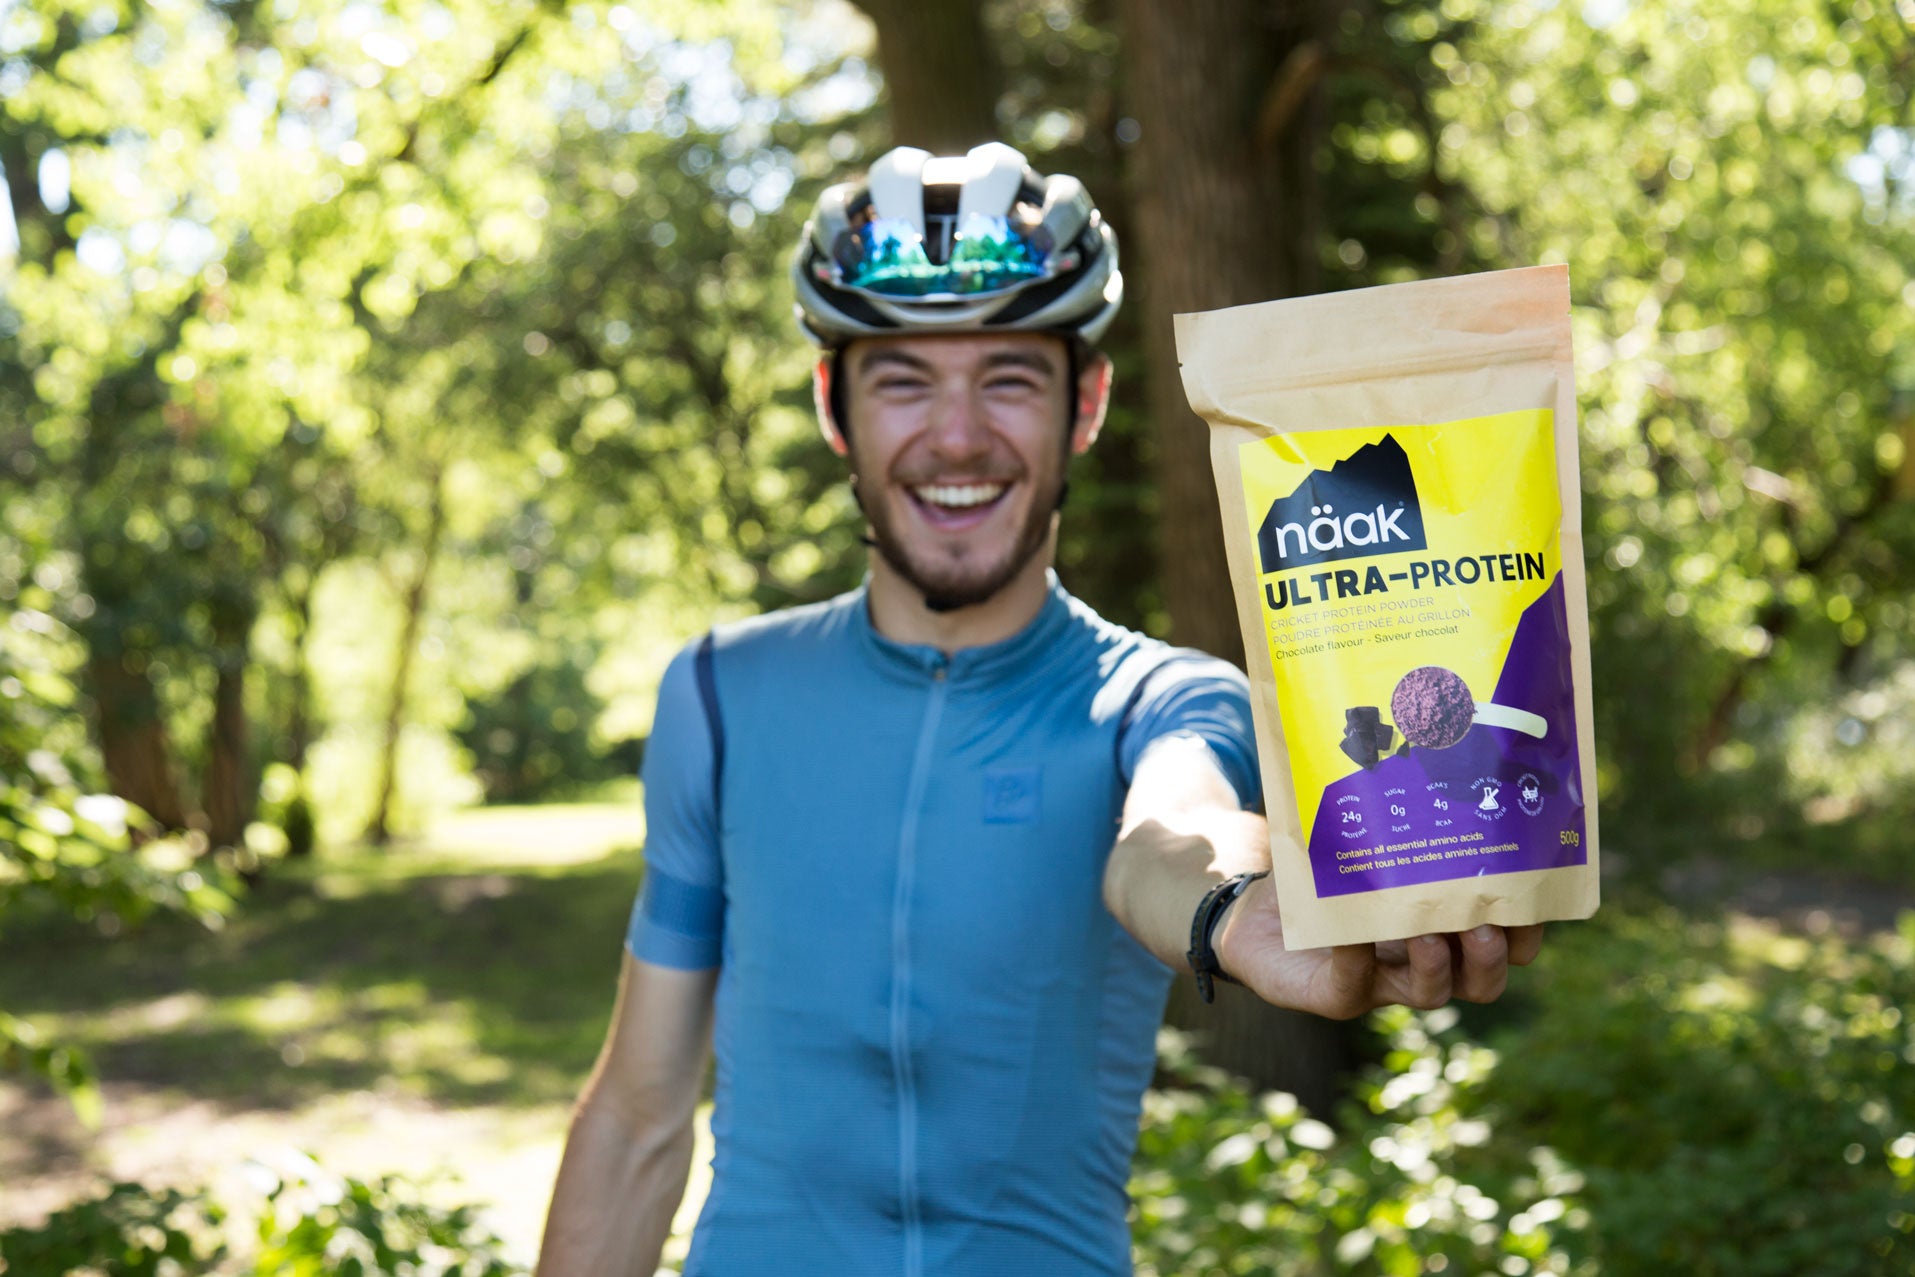 Cricket protein: a superfood for ultra athletes